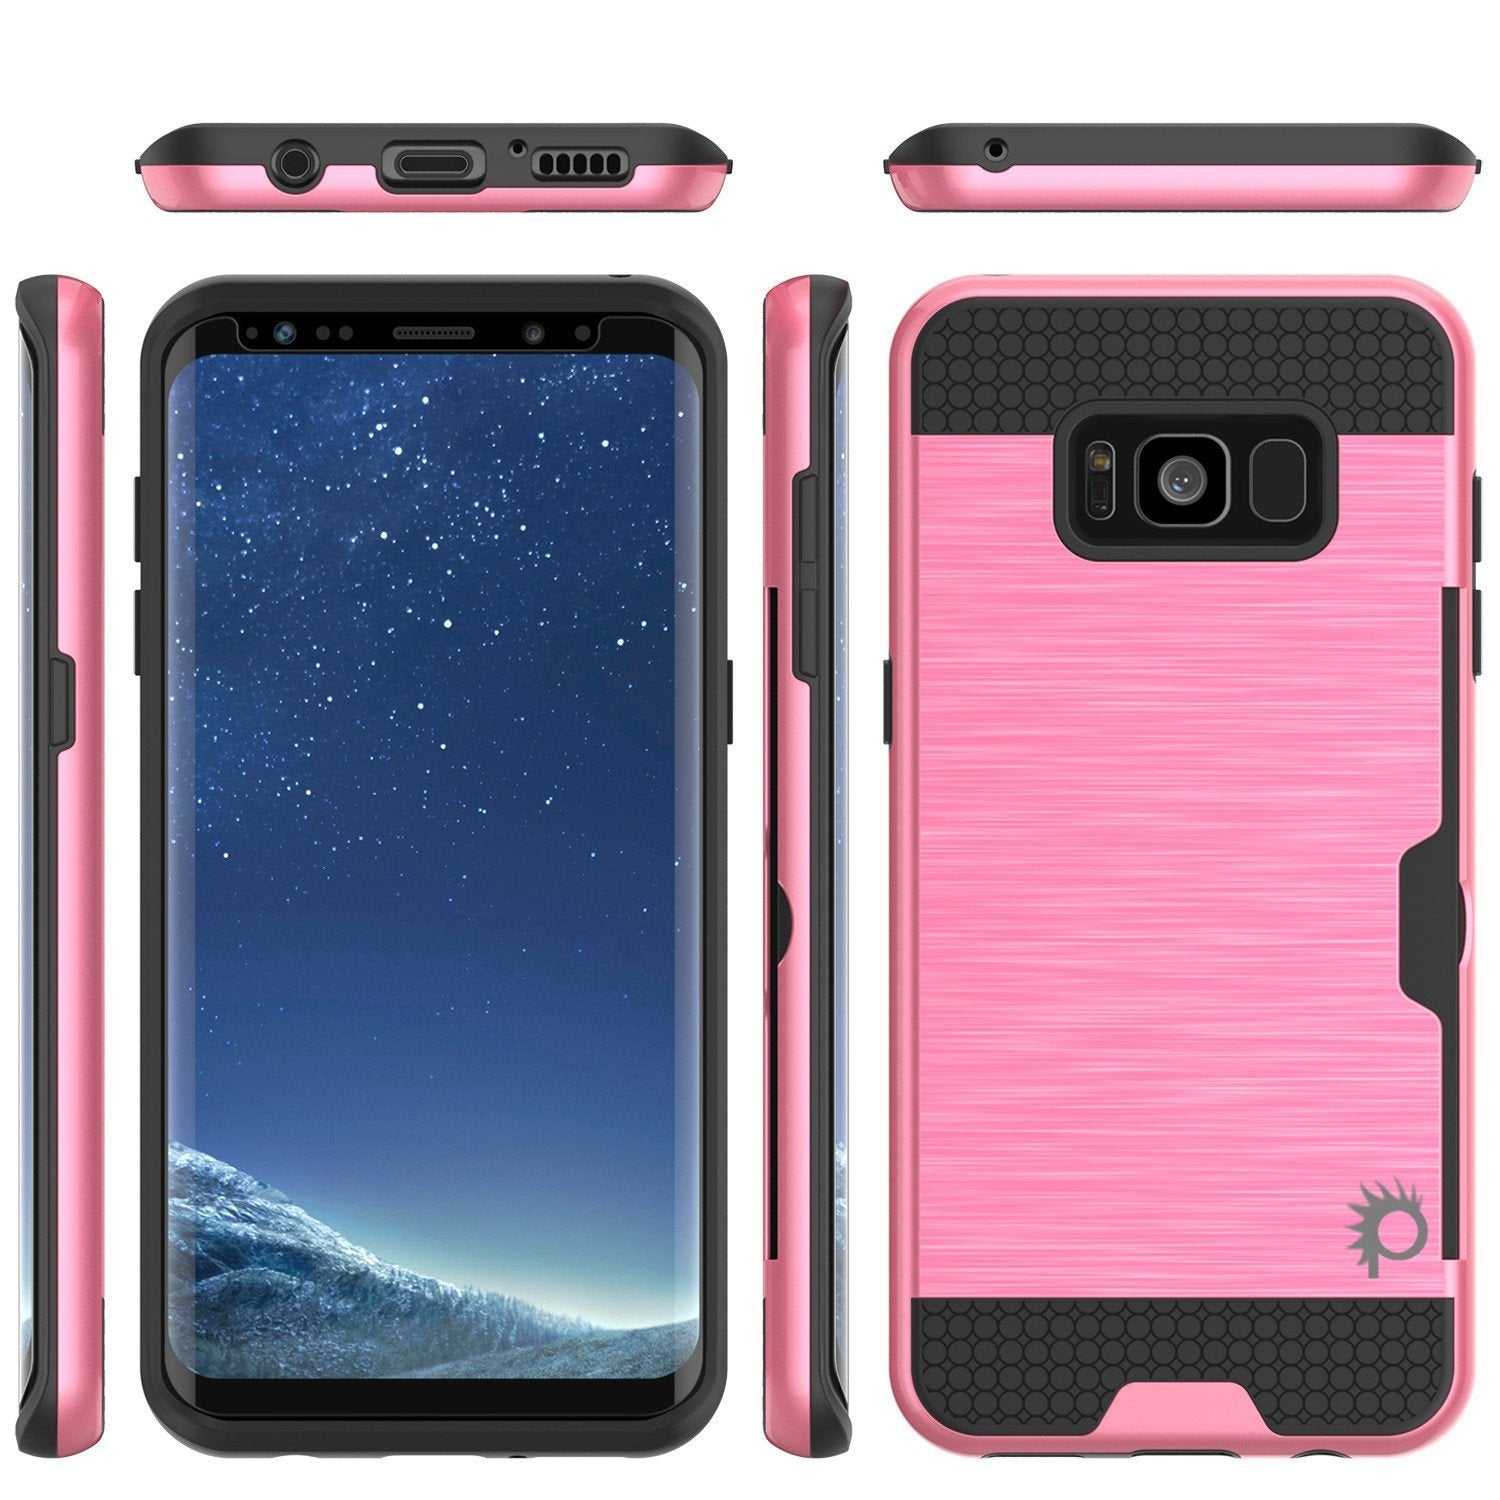 Galaxy S8 Case, PUNKcase [SLOT Series] Dual-Layer Armor Cover w/Integrated Anti-Shock System, Credit Card Slot & Screen Protector [Pink]